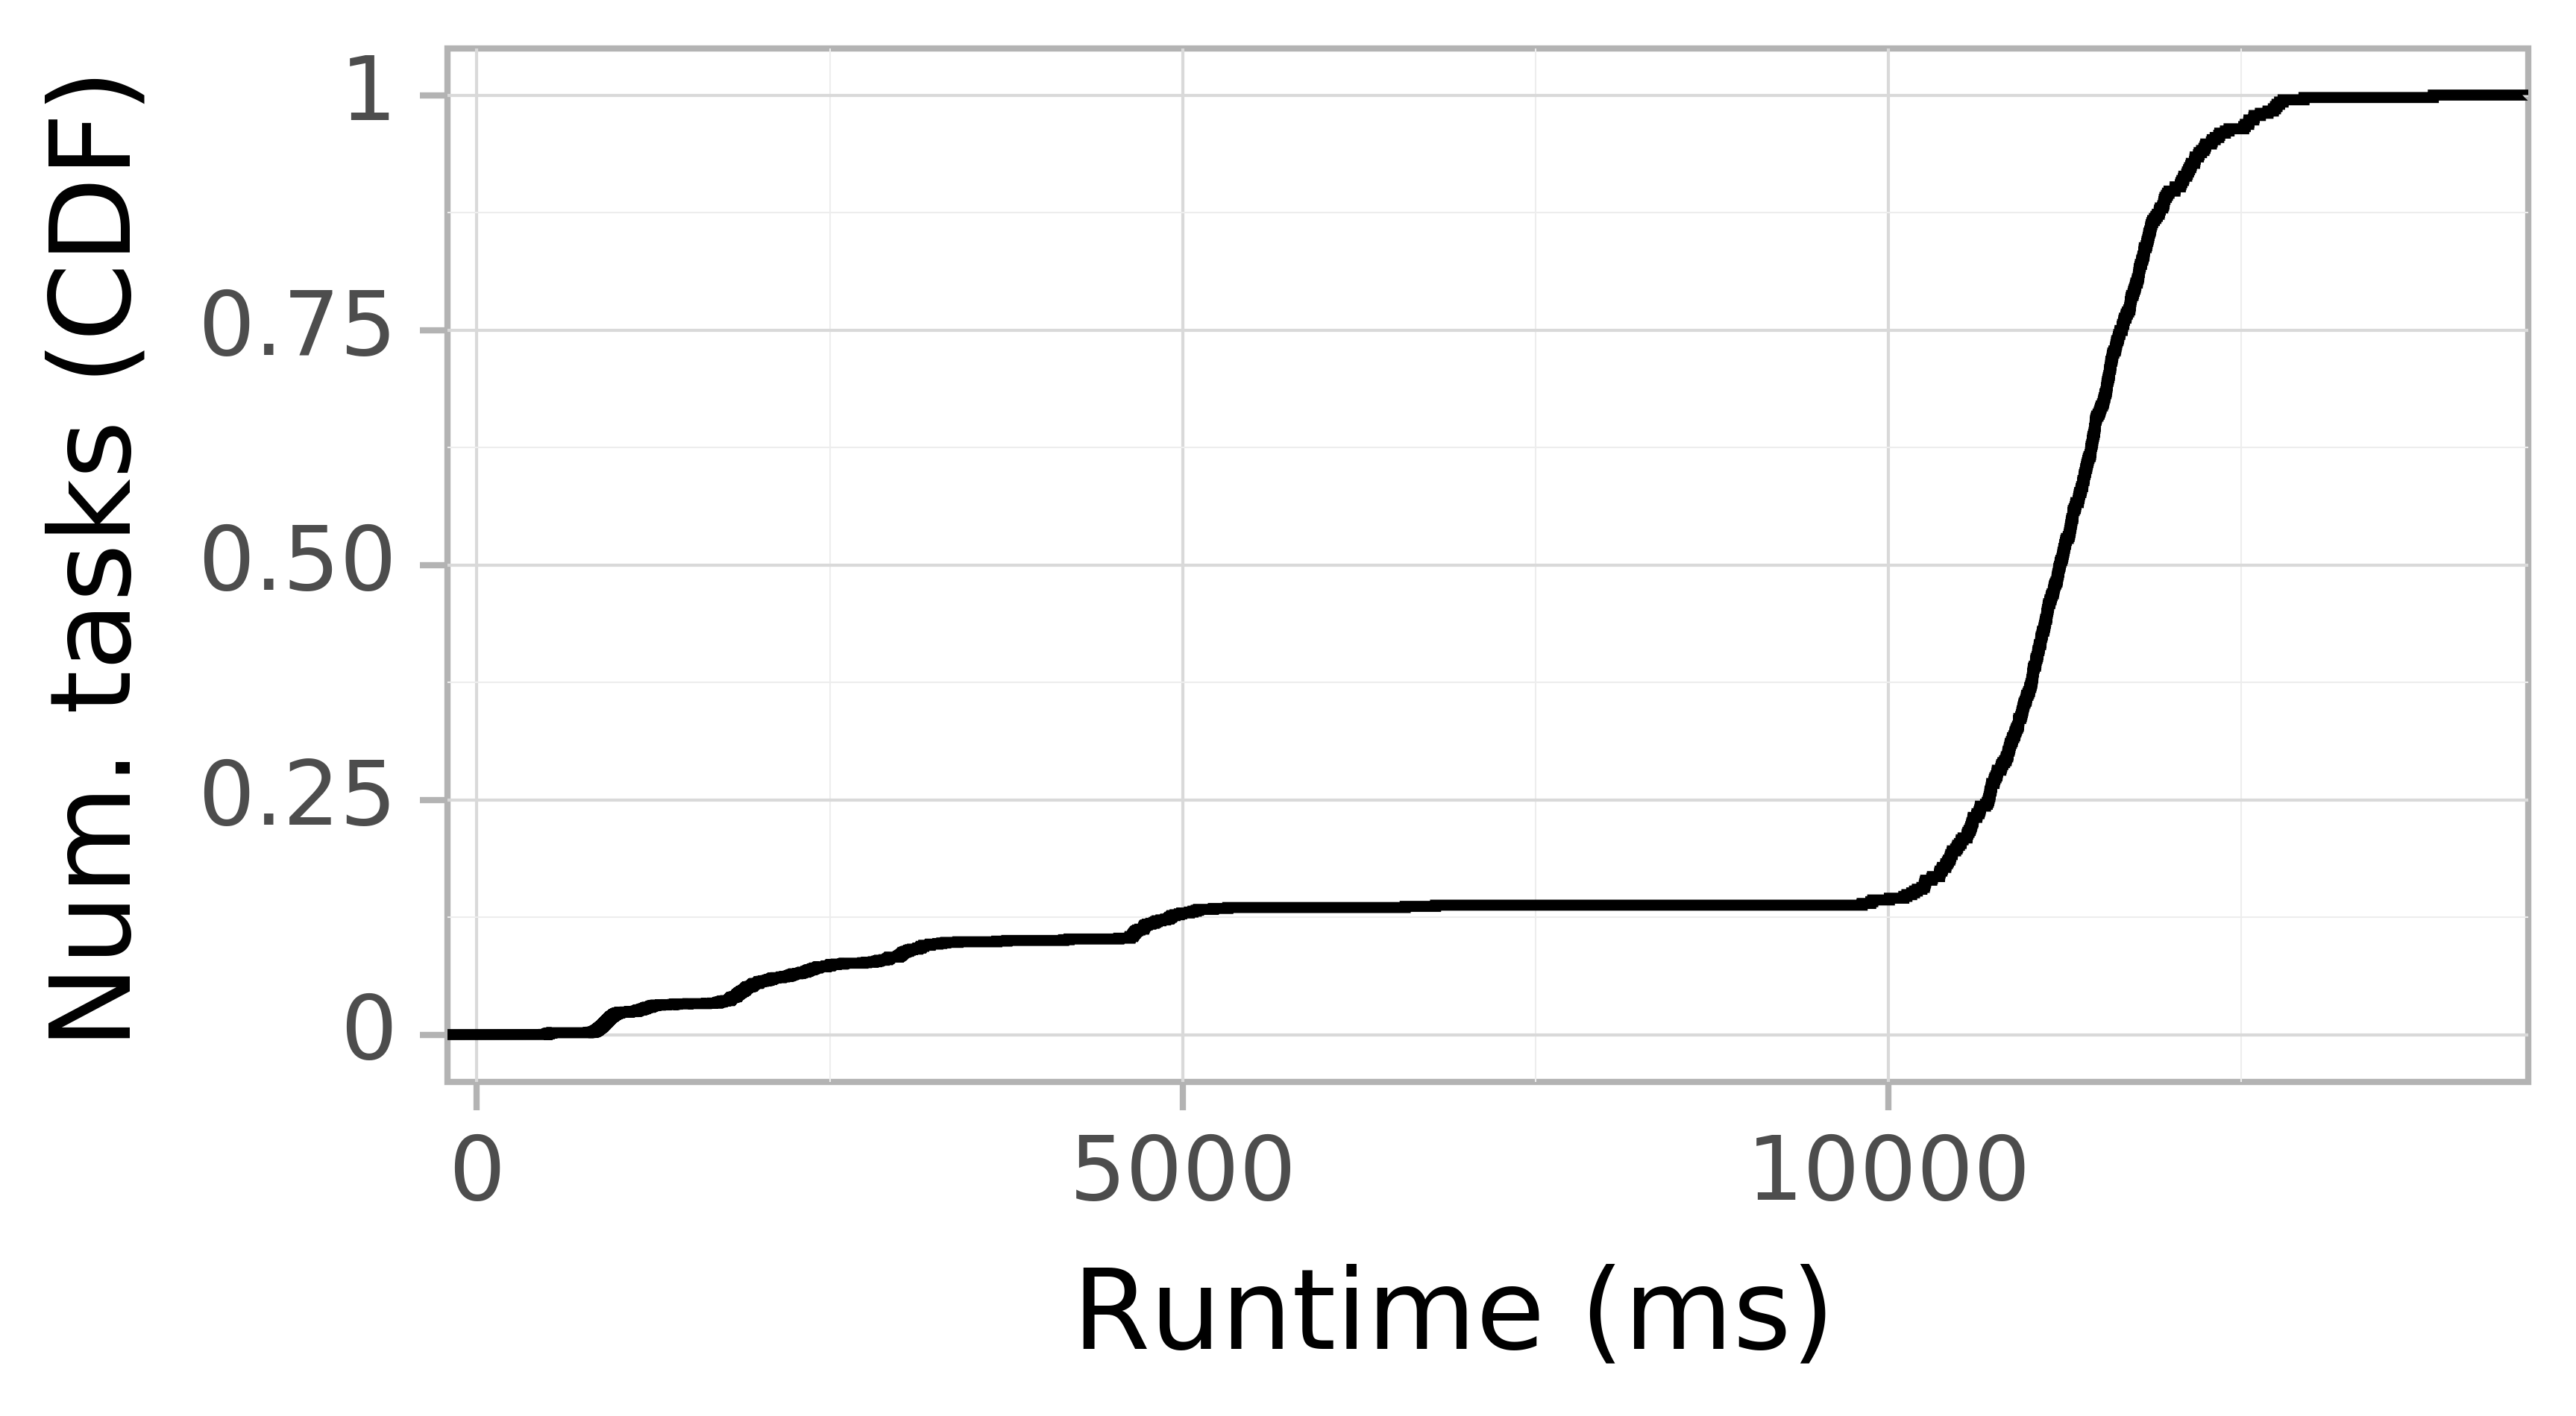 Task runtime CDF graph for the askalon-new_ee42 trace.